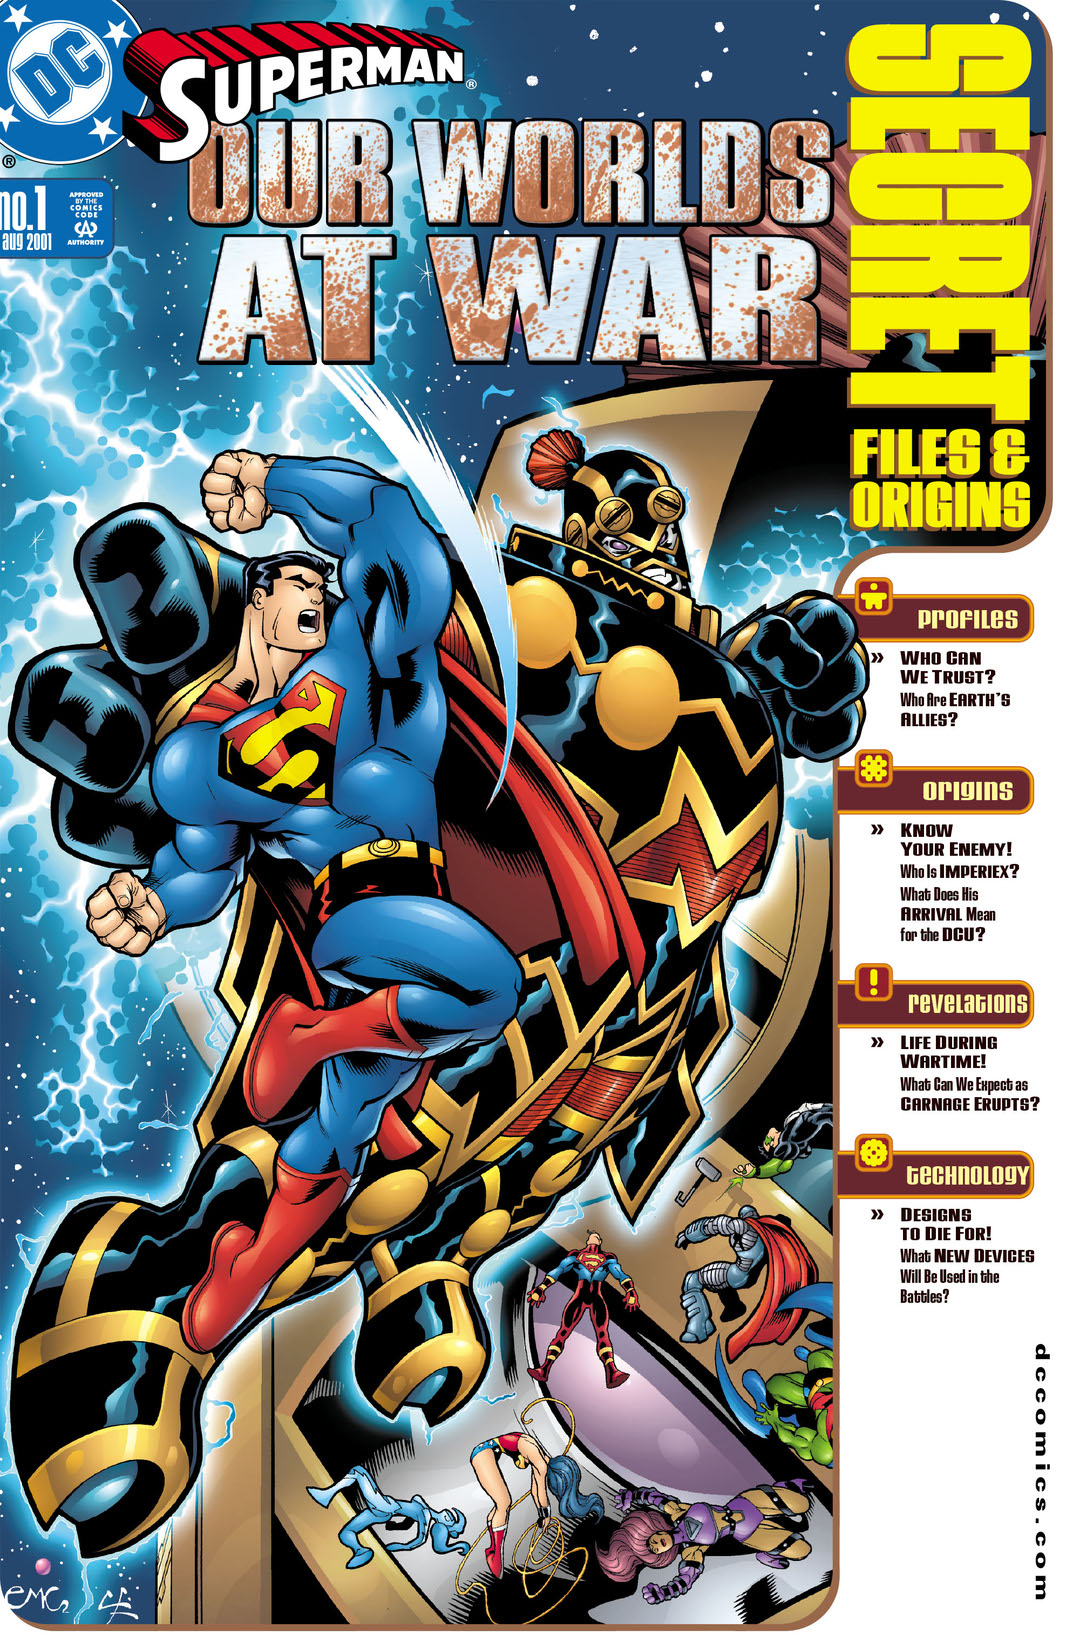 Superman: Our Worlds at War Secret Files #1 preview images